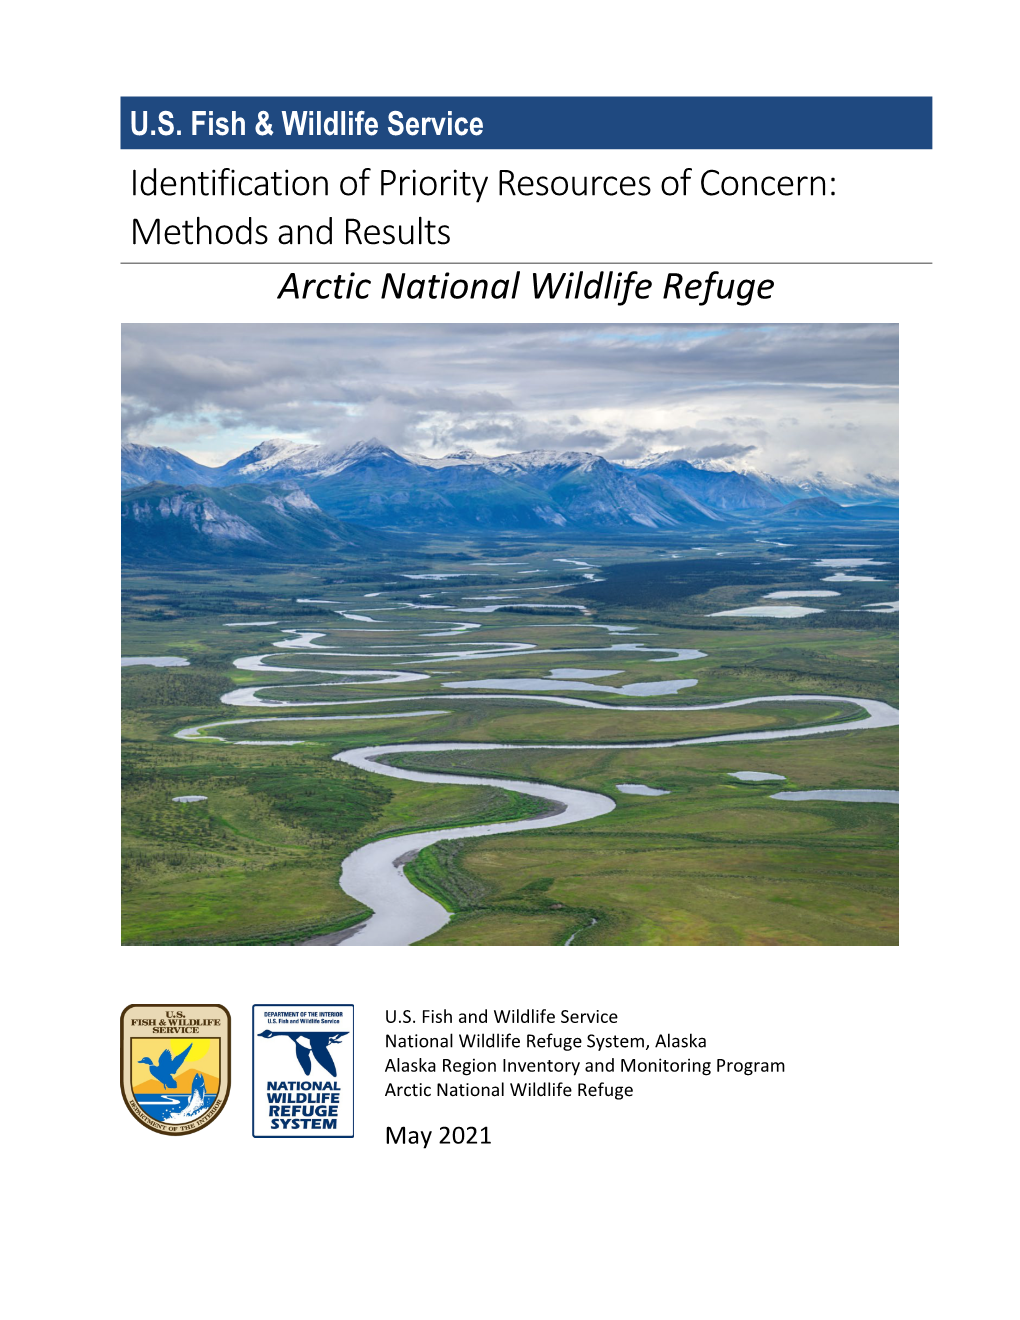 Methods and Results Arctic National Wildlife Refuge